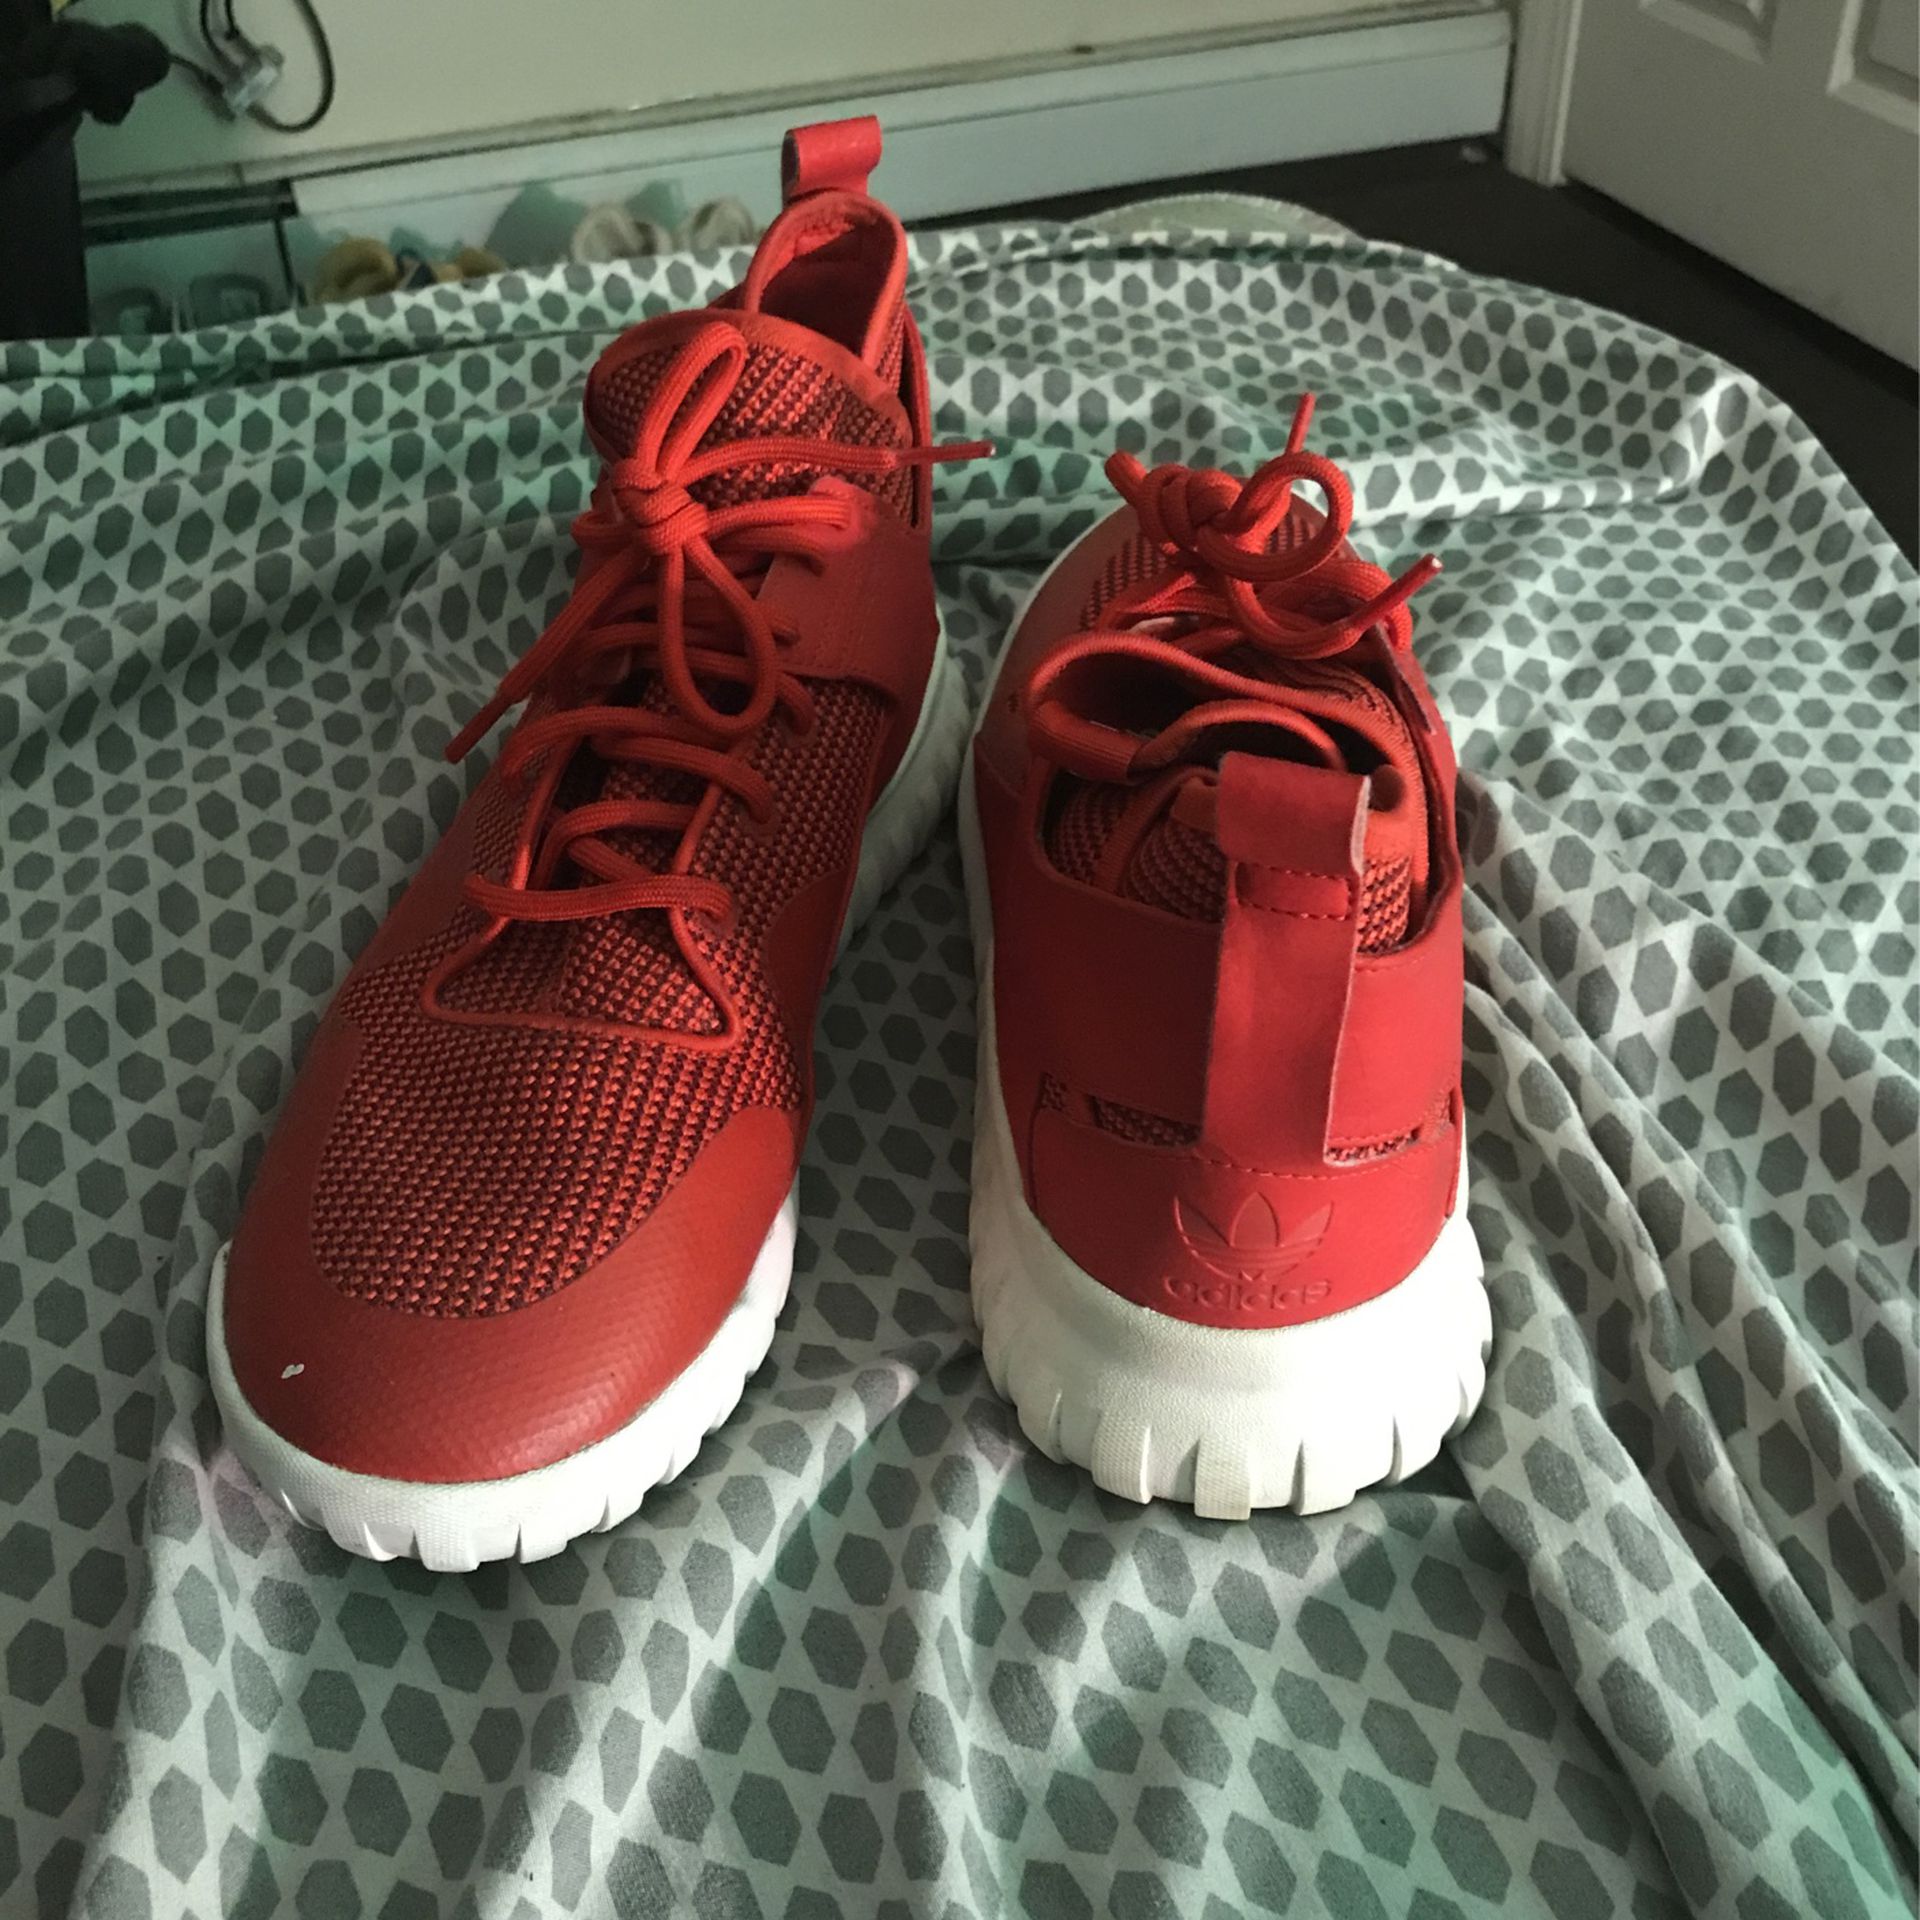 Used Twice Adidas Shoes Size 10 In A Half